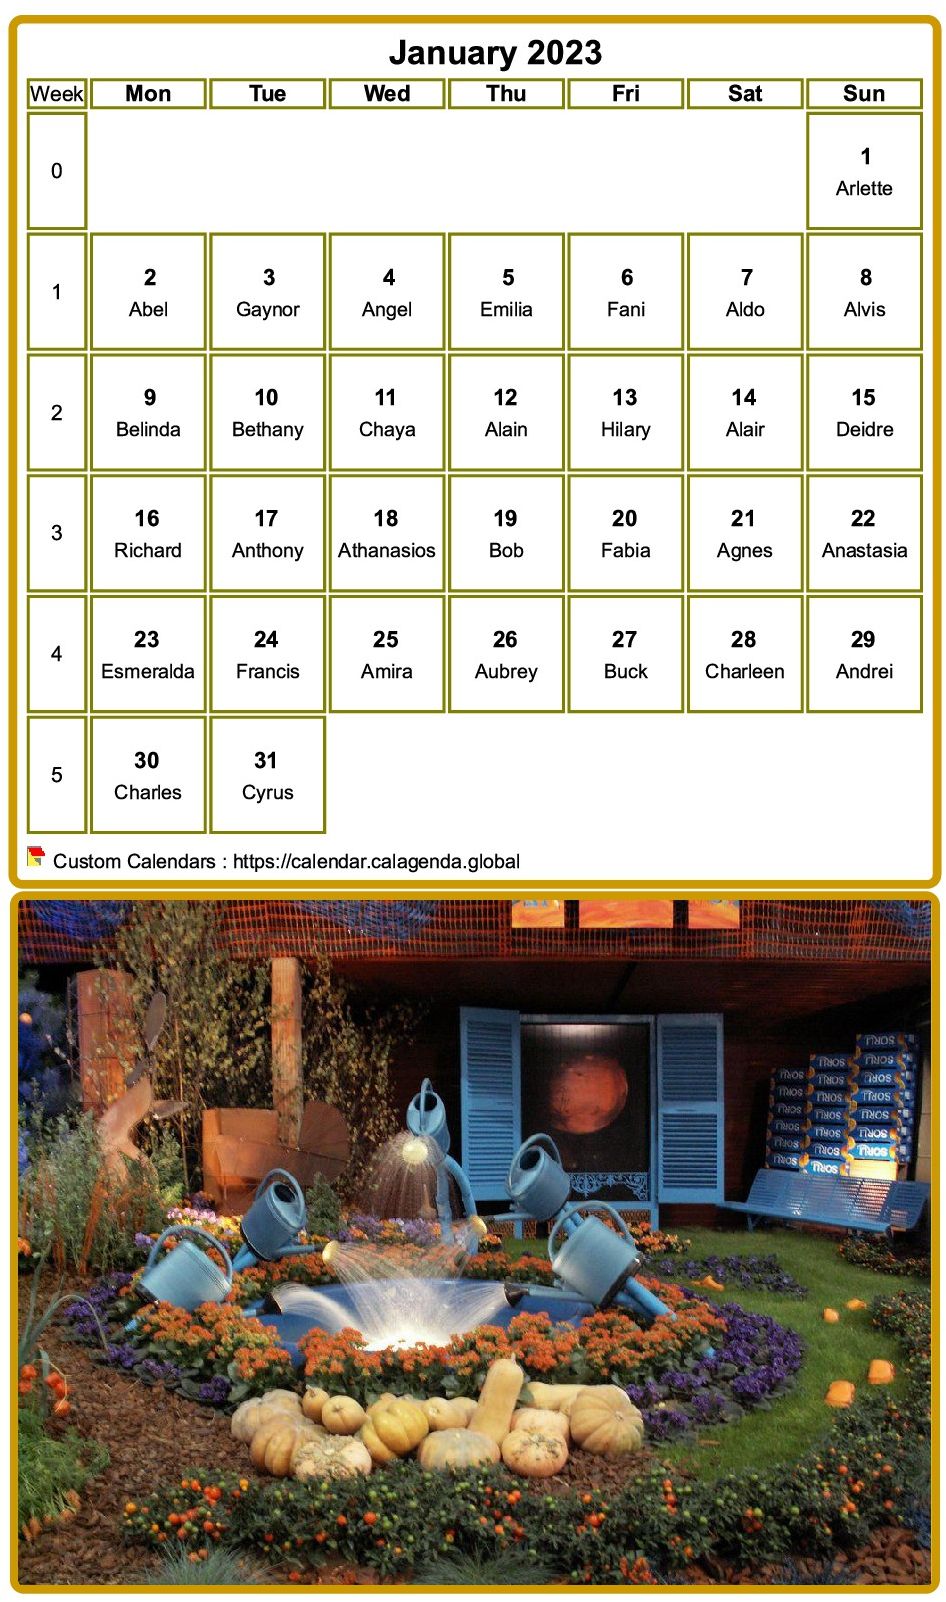 Calendar monthly 2023 to print, with photograph in underside